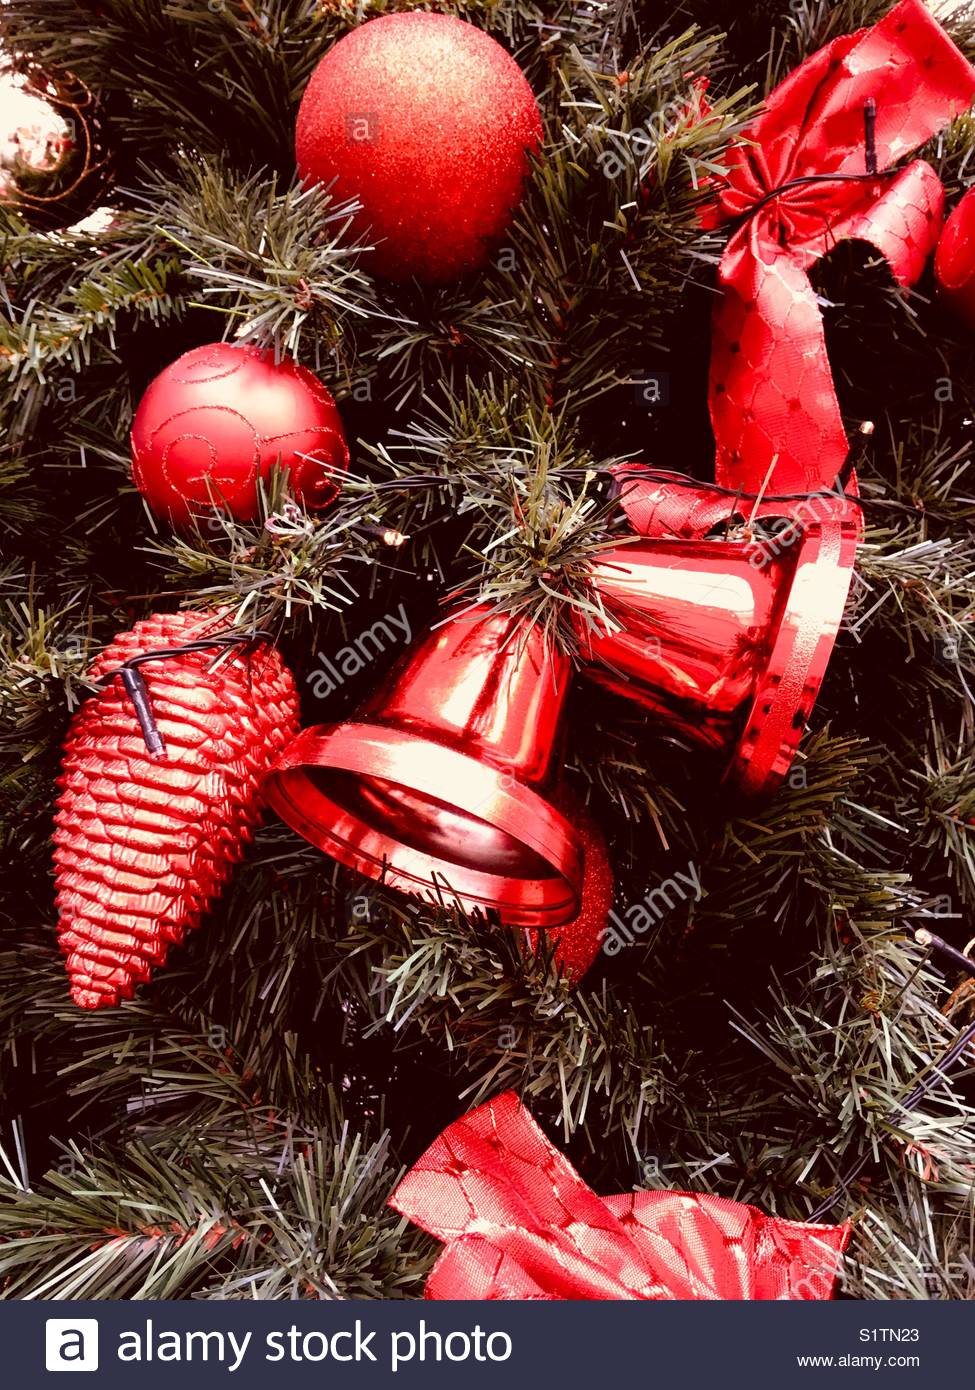 Close up of Christmas tree decorations in red Stock Image